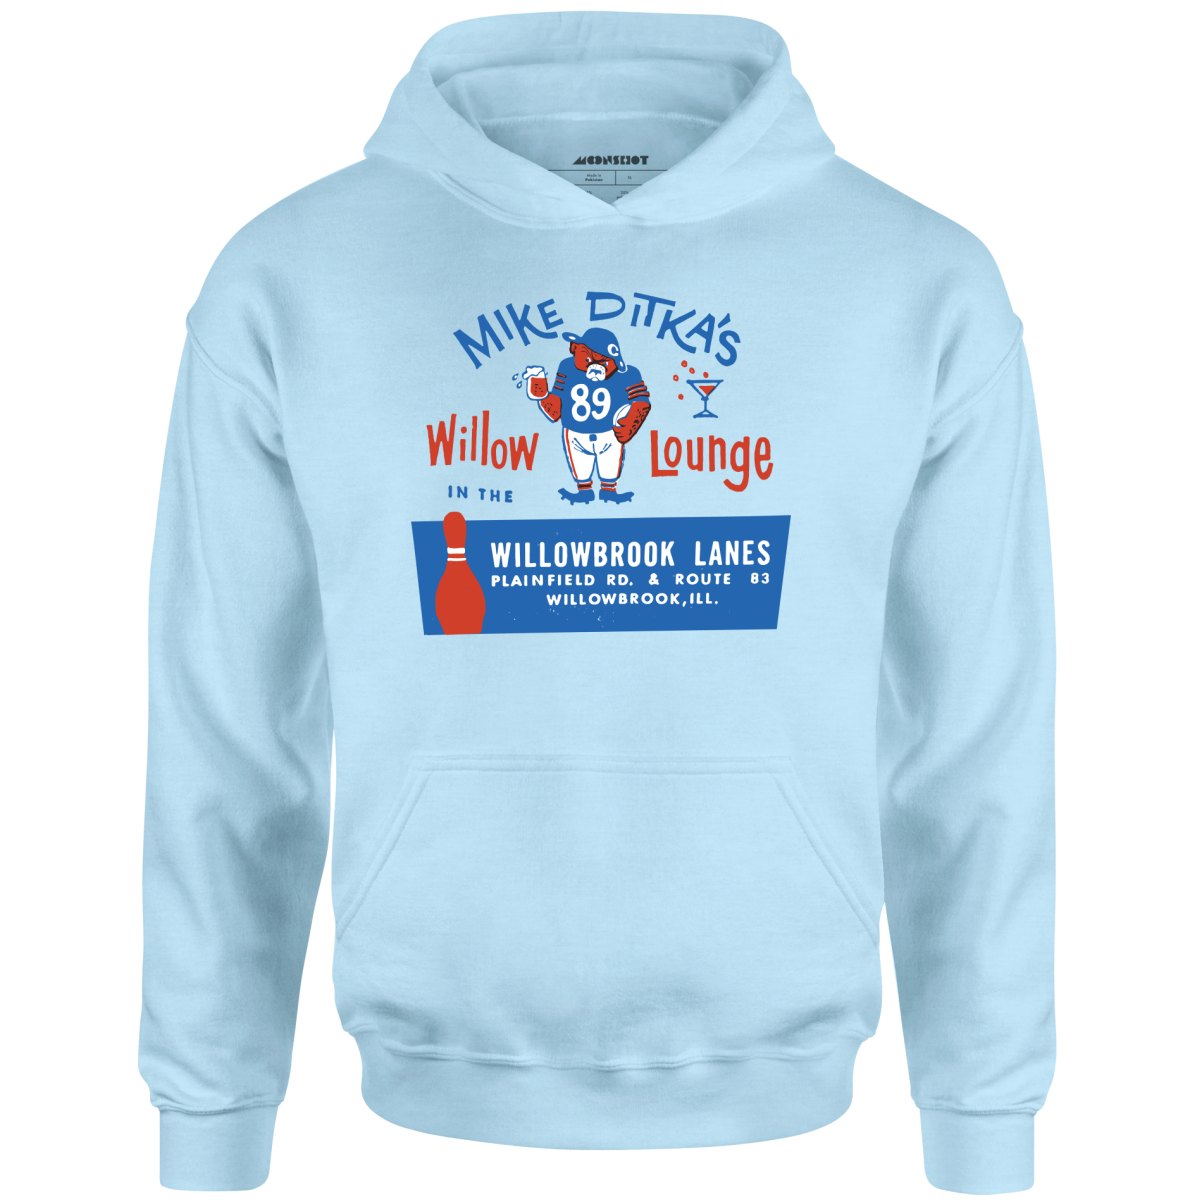 Mike Ditka's Willow Lounge - Willowbrook, IL - Vintage Bowling Alley - Unisex Hoodie